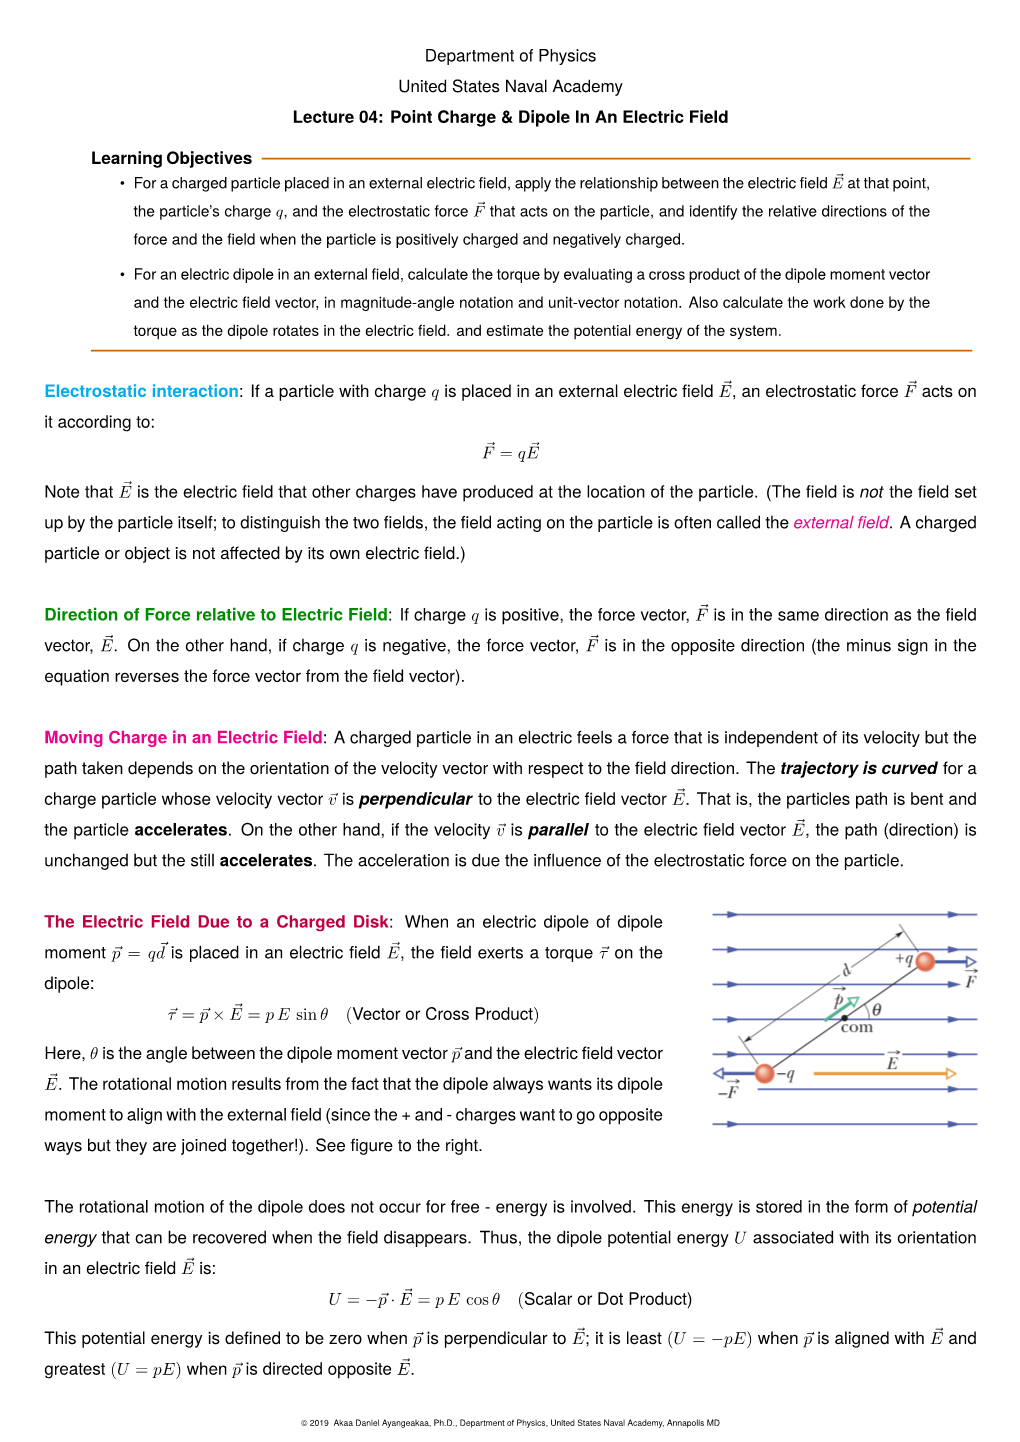 Point Charge & Dipole in an Electric Field Learning Objectives